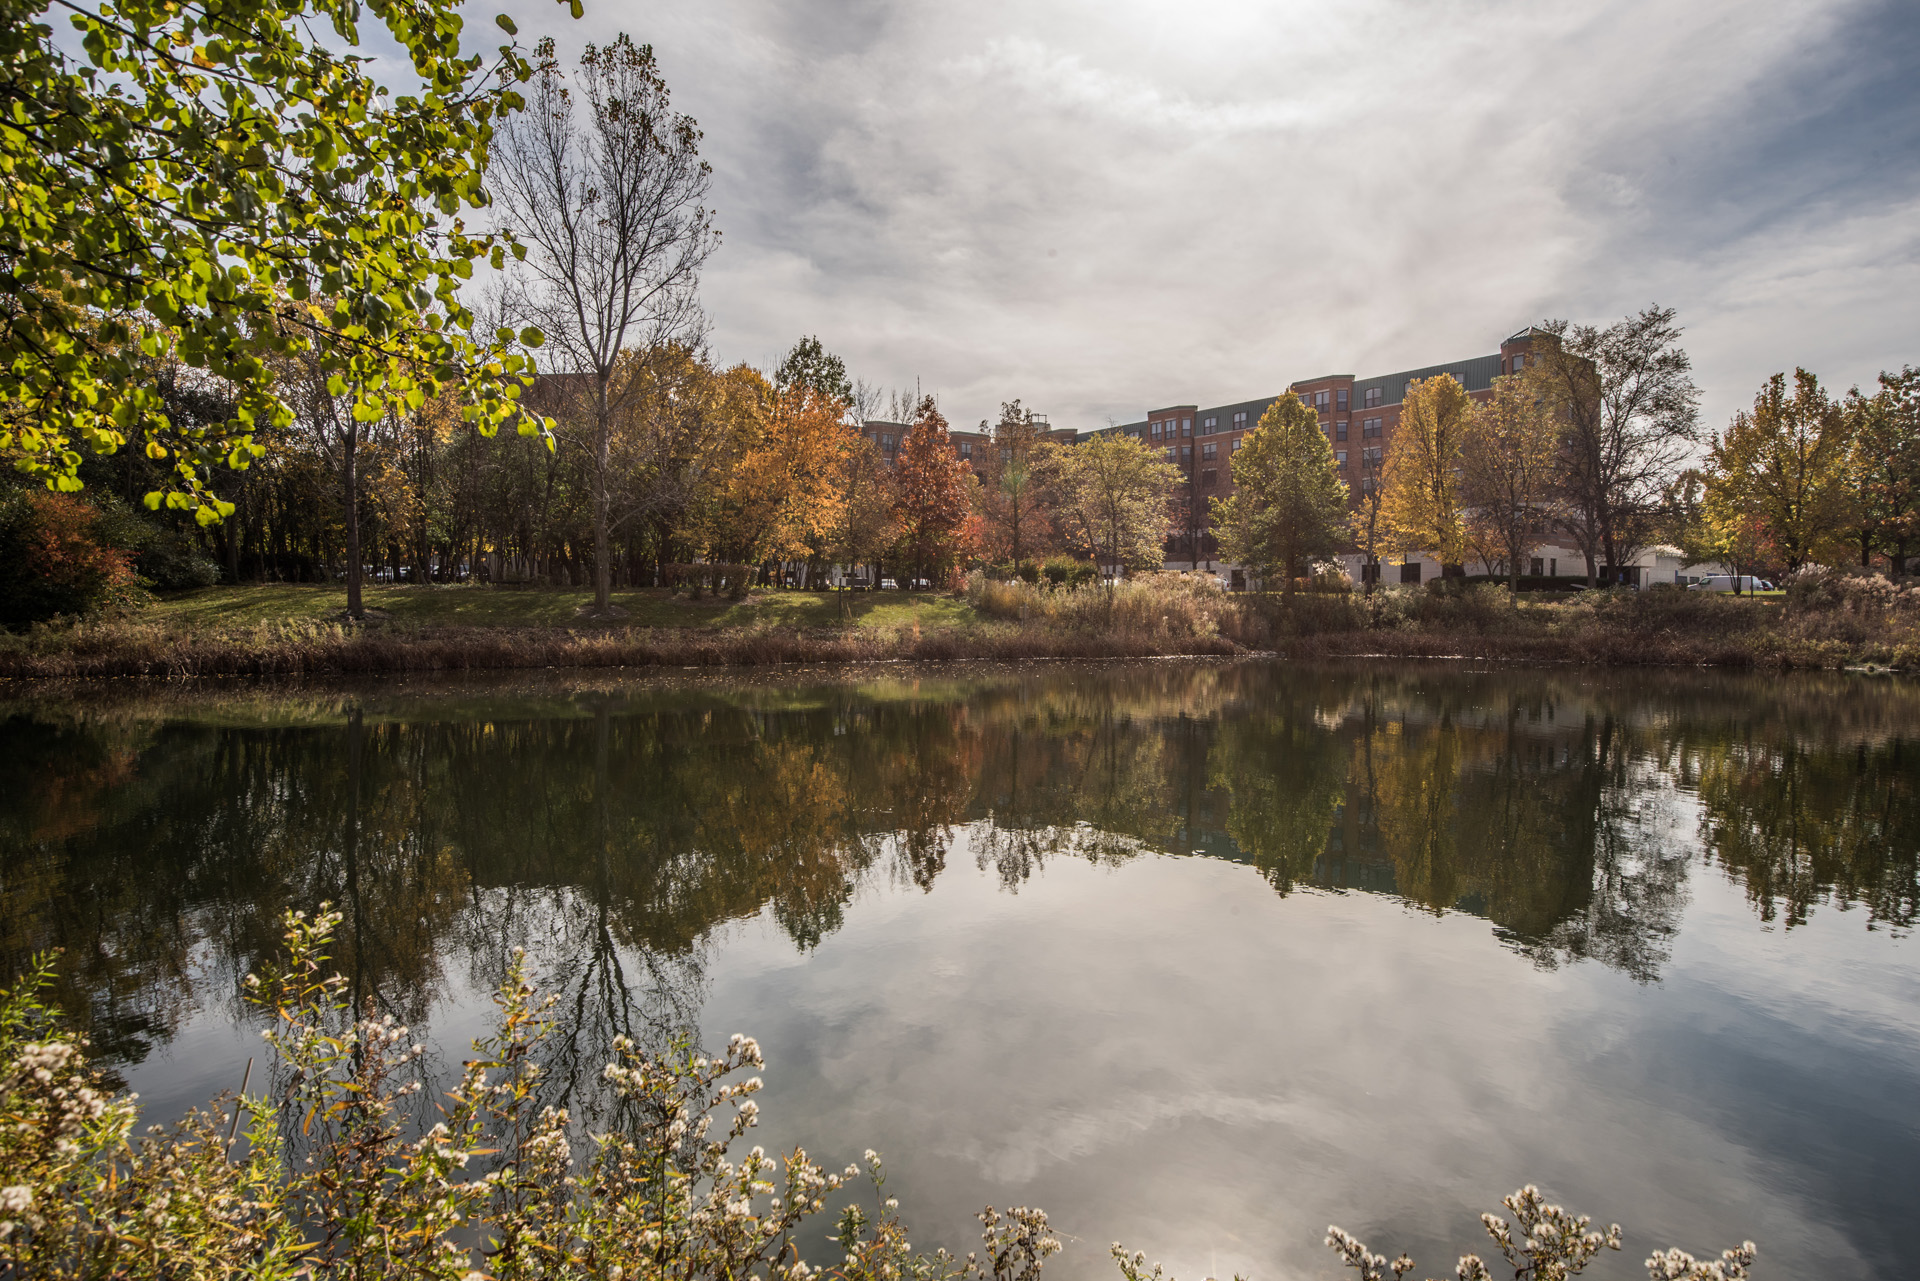 Scenic body of water backdropped by autumnal trees at Oak Trace Senior Living Community